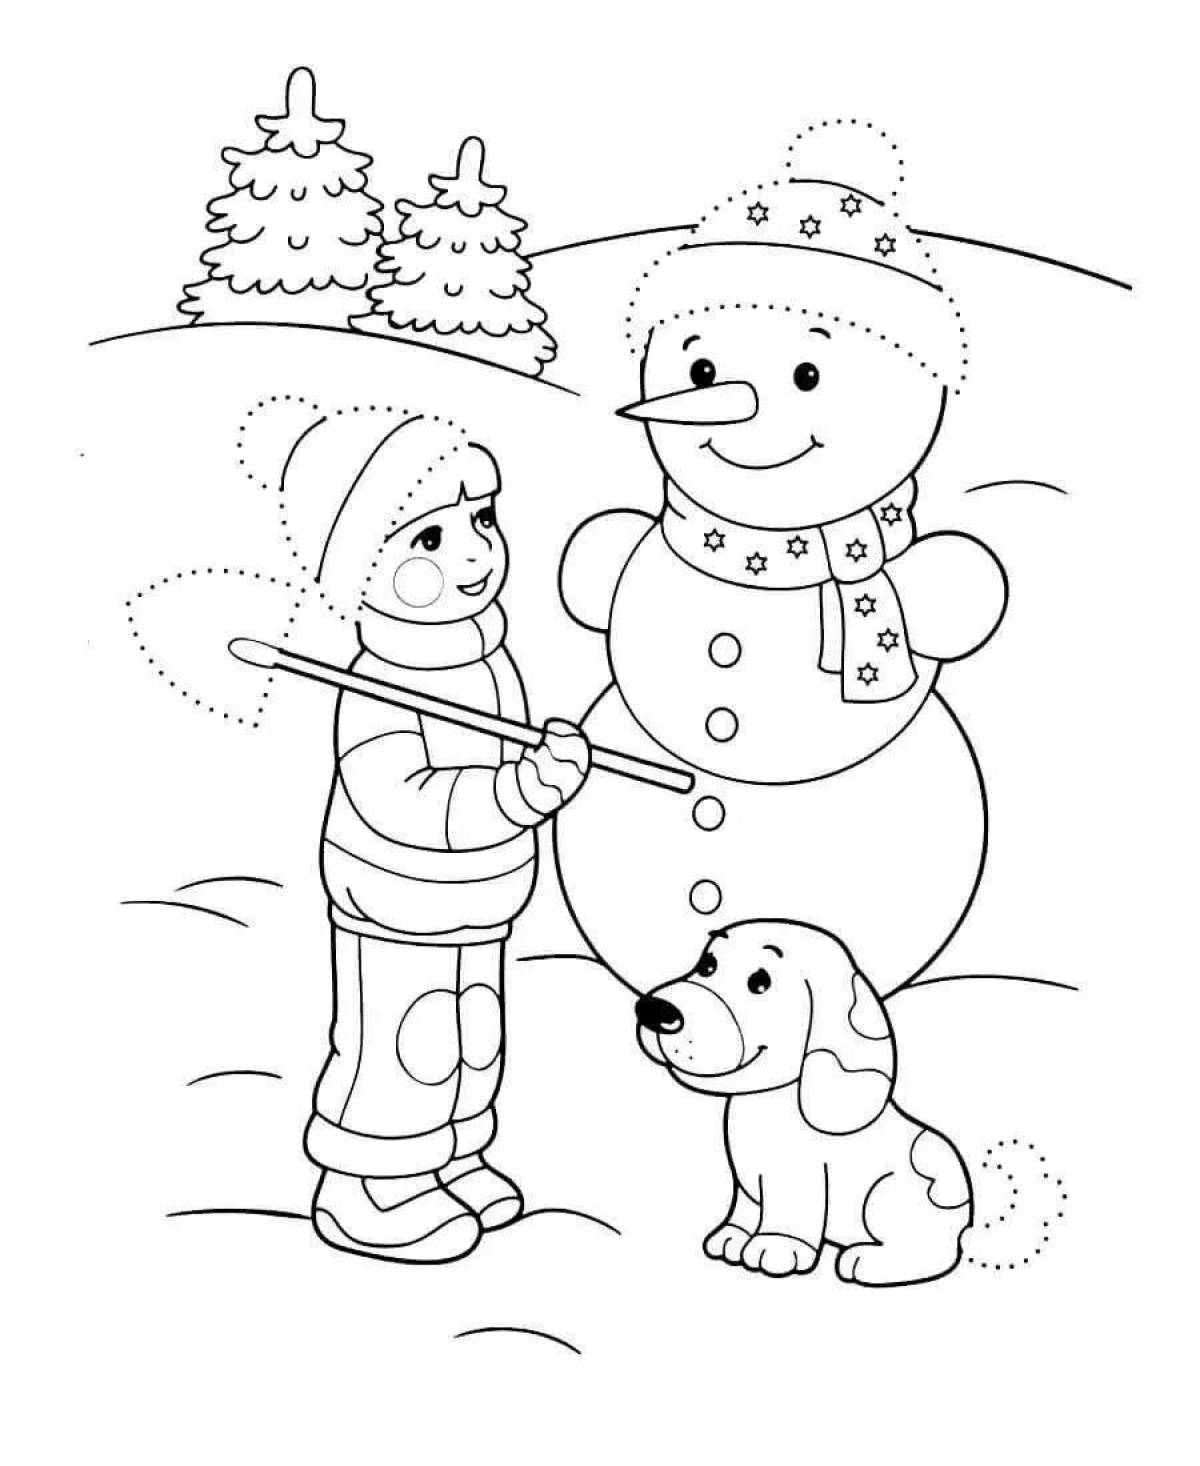 Great coloring book winter fun for 3-4 year olds in kindergarten